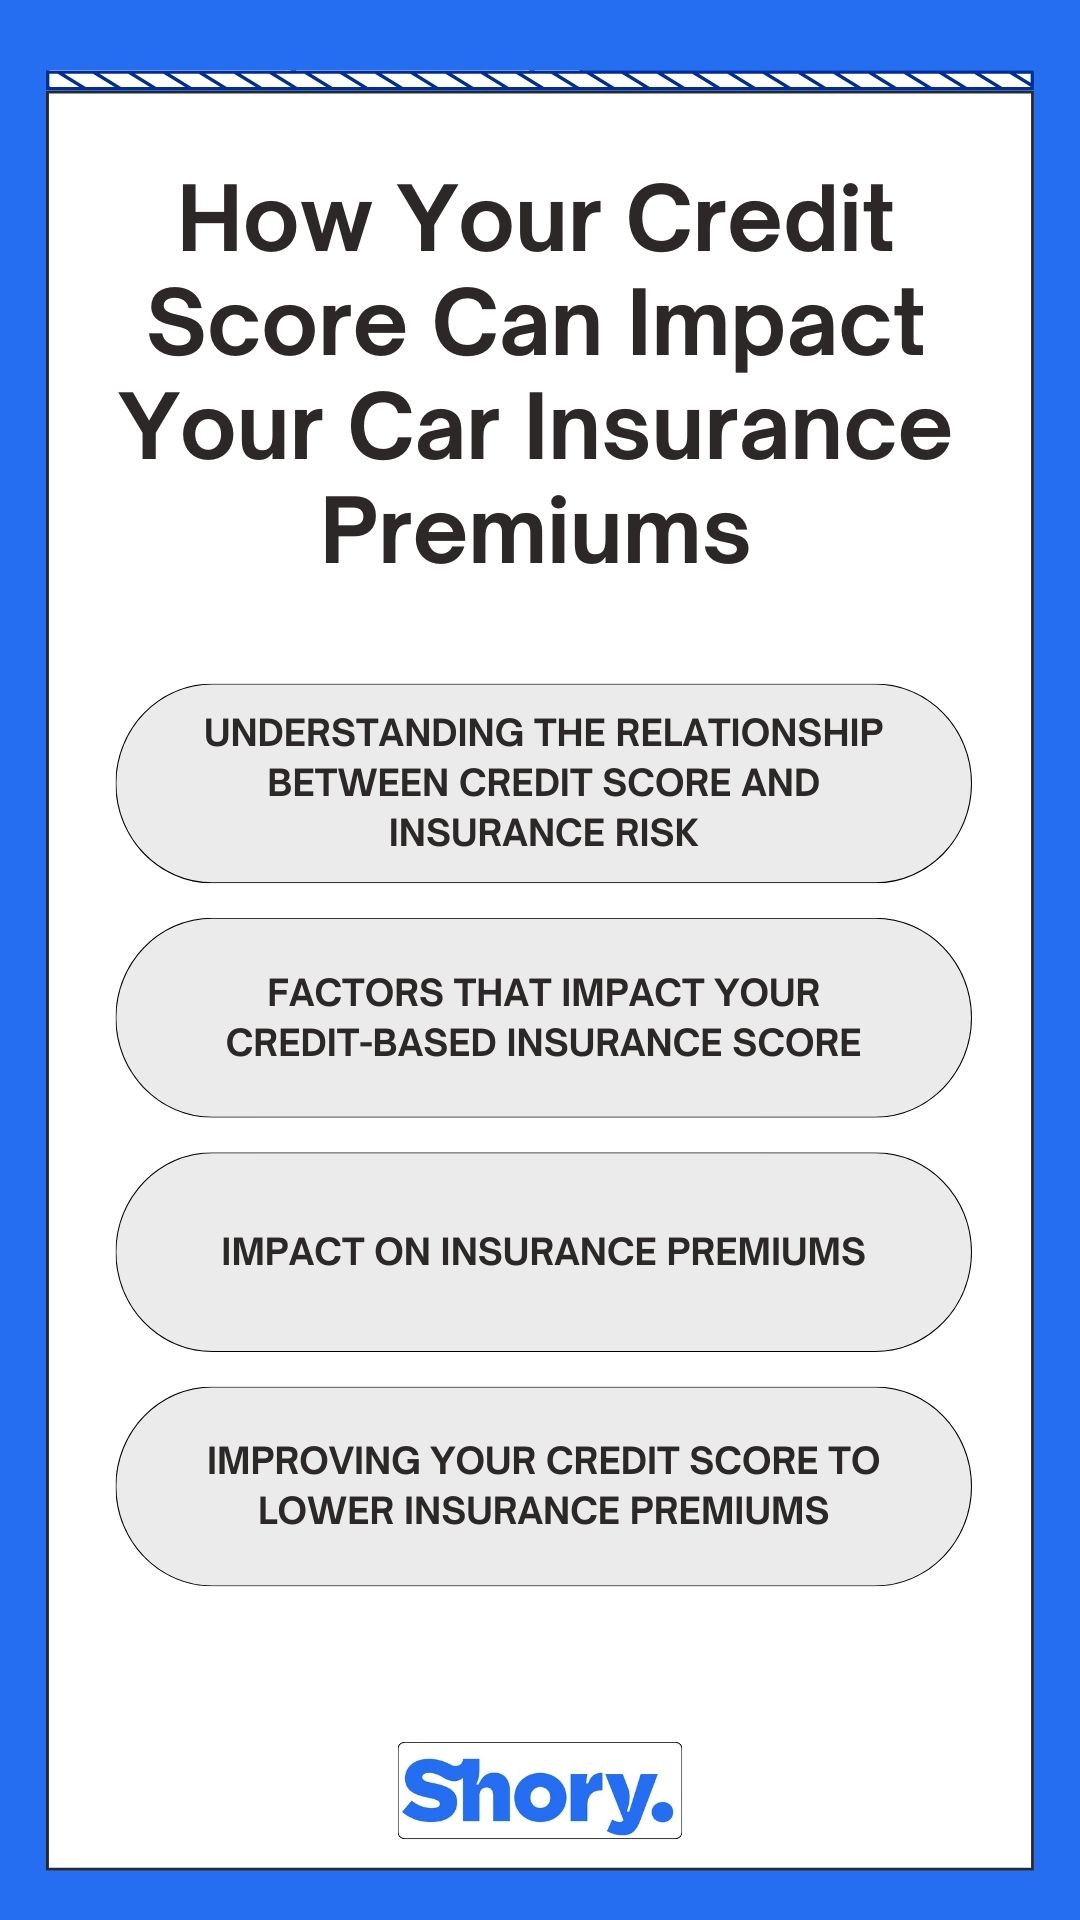 How Your Credit Score Can Impact Your Car Insurance Premiums